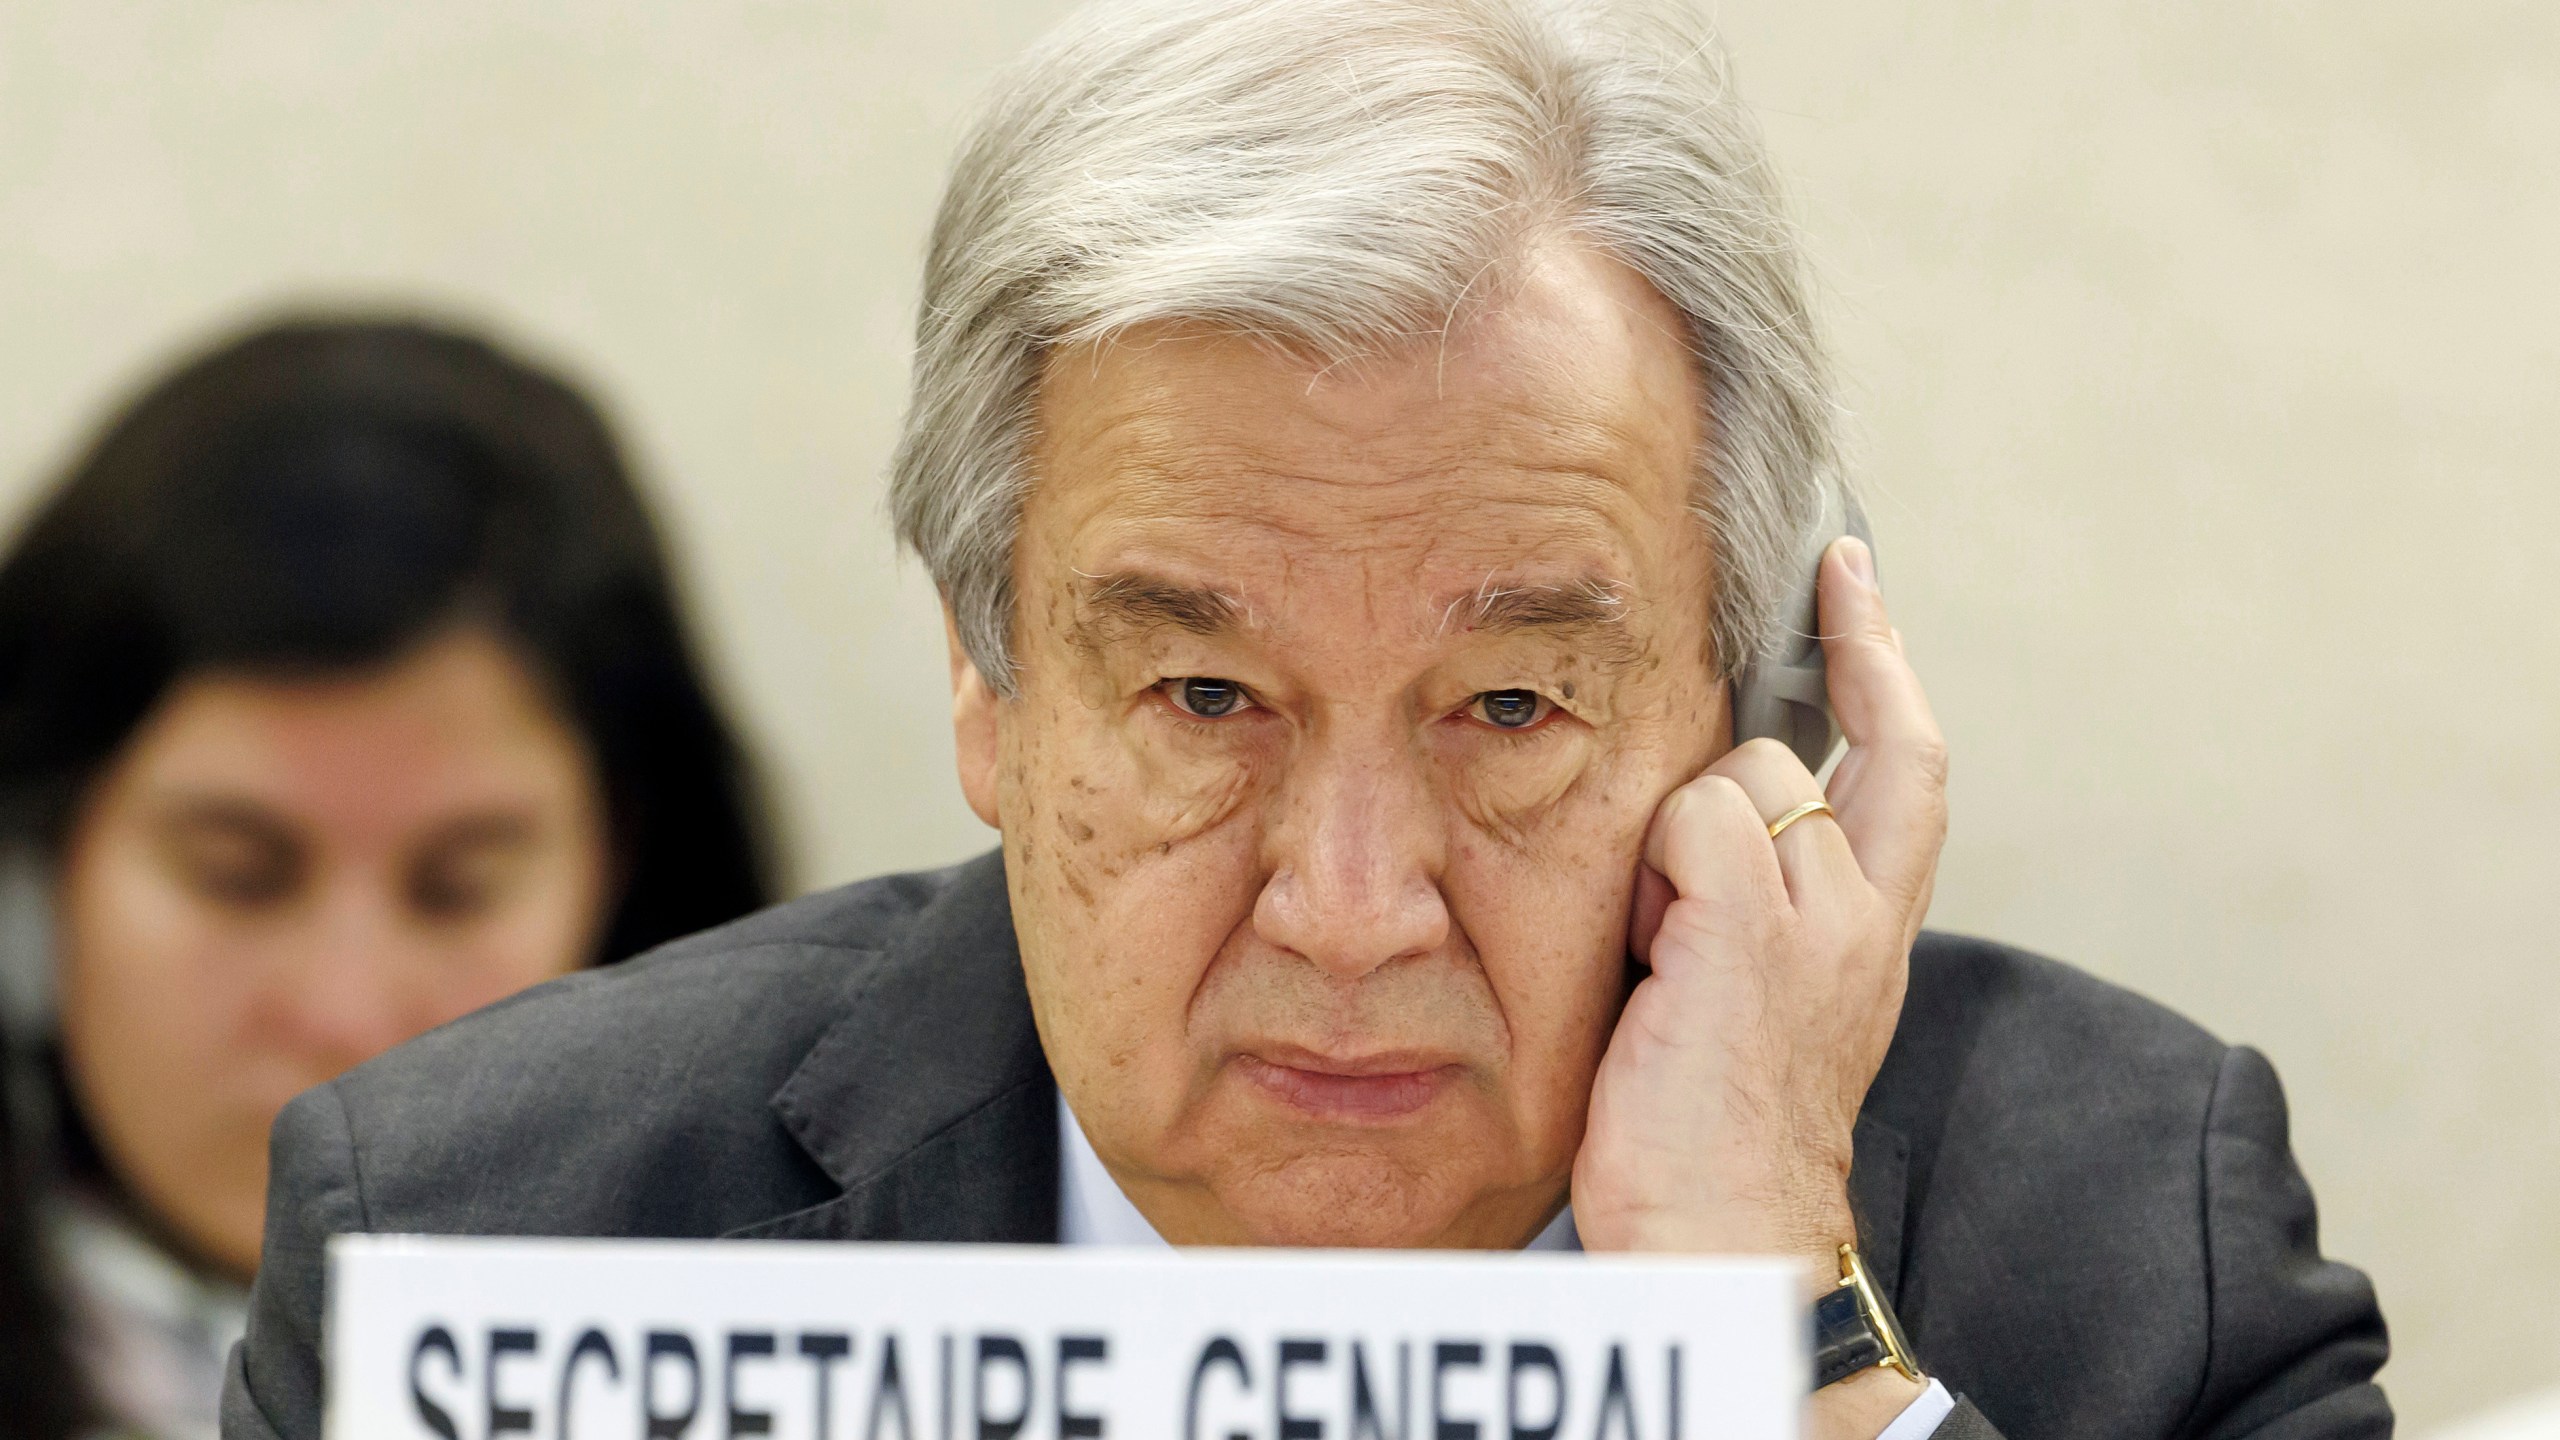 FILE - U.N. Secretary-General Antonio Guterres listens to a speech during the opening of the High-Level Segment of the 55th session of the Human Rights Council at the European headquarters of the United Nations in Geneva, Switzerland, on Feb. 26, 2024. U.N. Guterres will attend a session of the Shanghai Cooperation Organization summit in Astana, Kazakhstan. (Salvatore Di Nolfi/Keystone via AP, File)